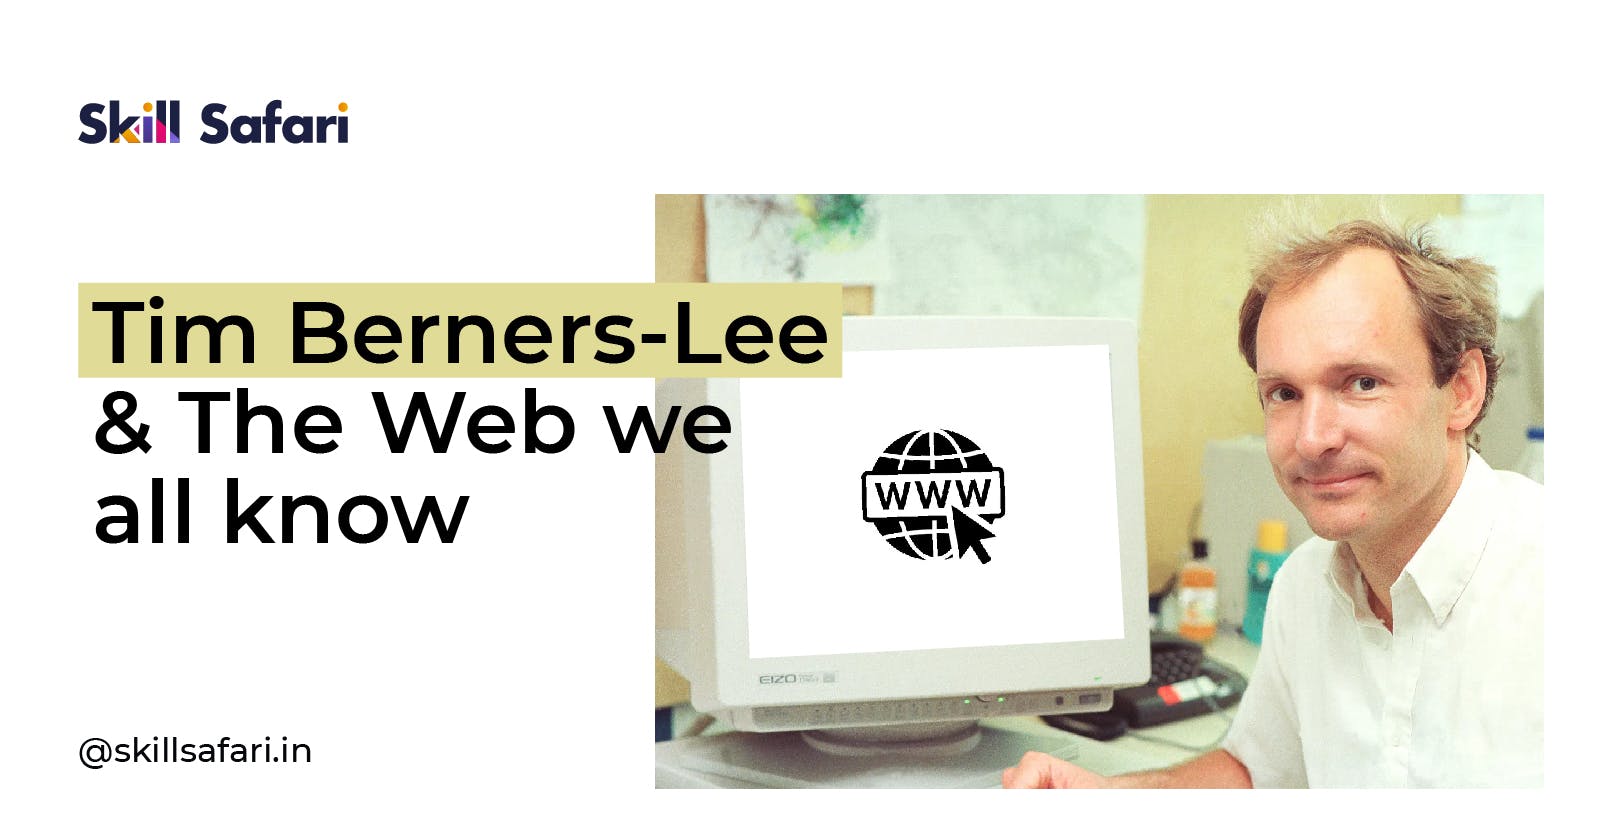 Tim Berners-Lee & The Web we all know